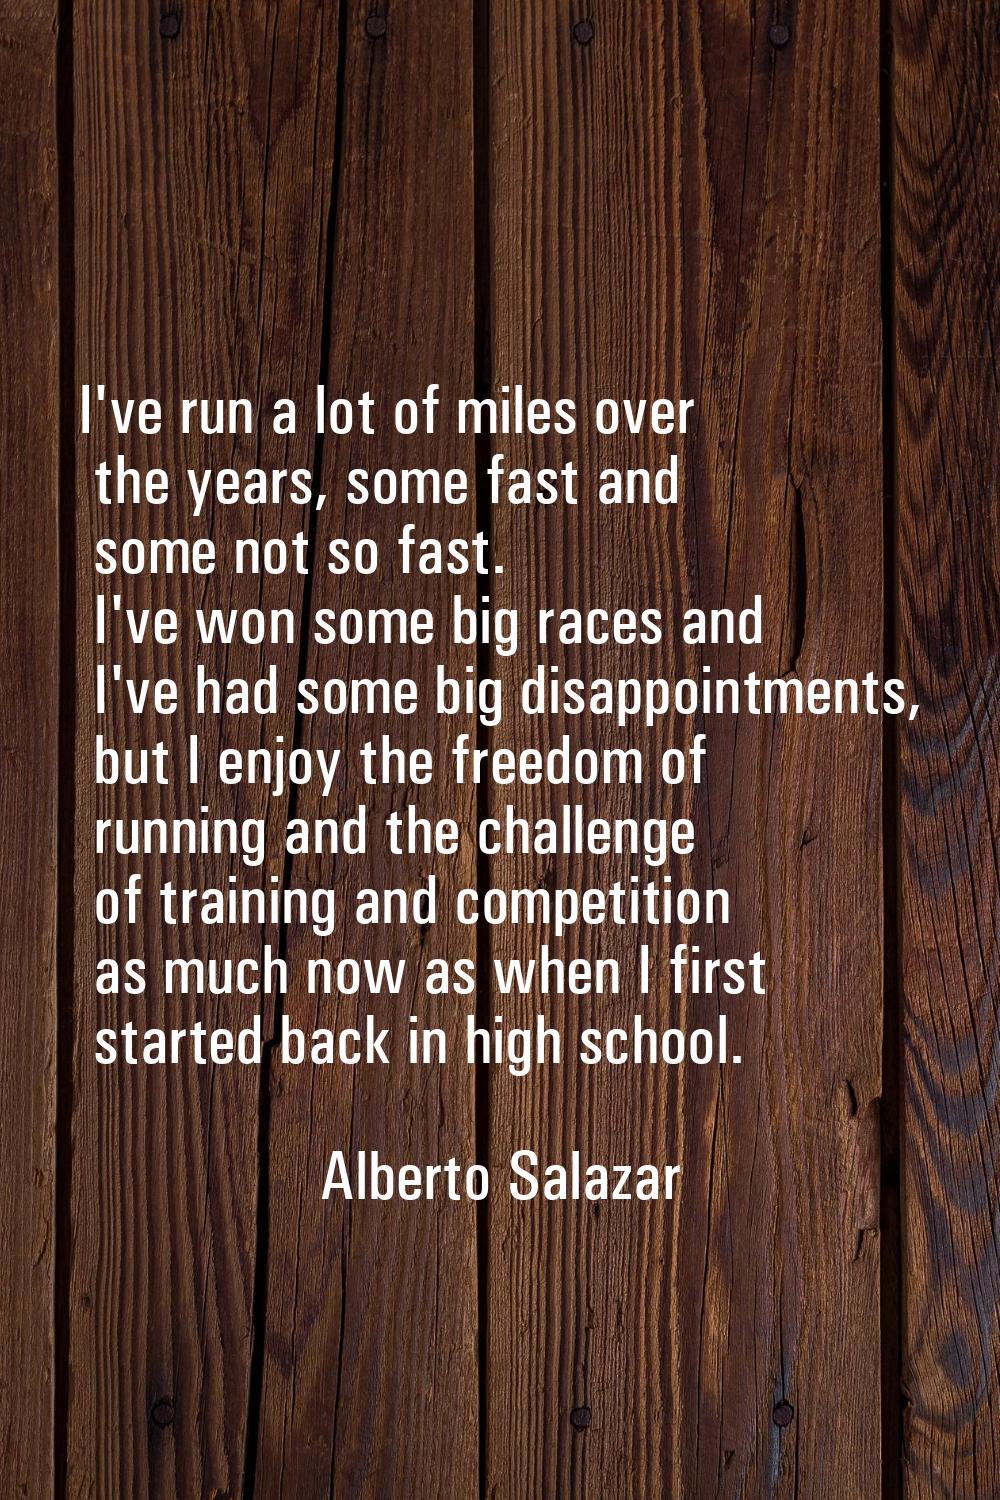 I've run a lot of miles over the years, some fast and some not so fast. I've won some big races and